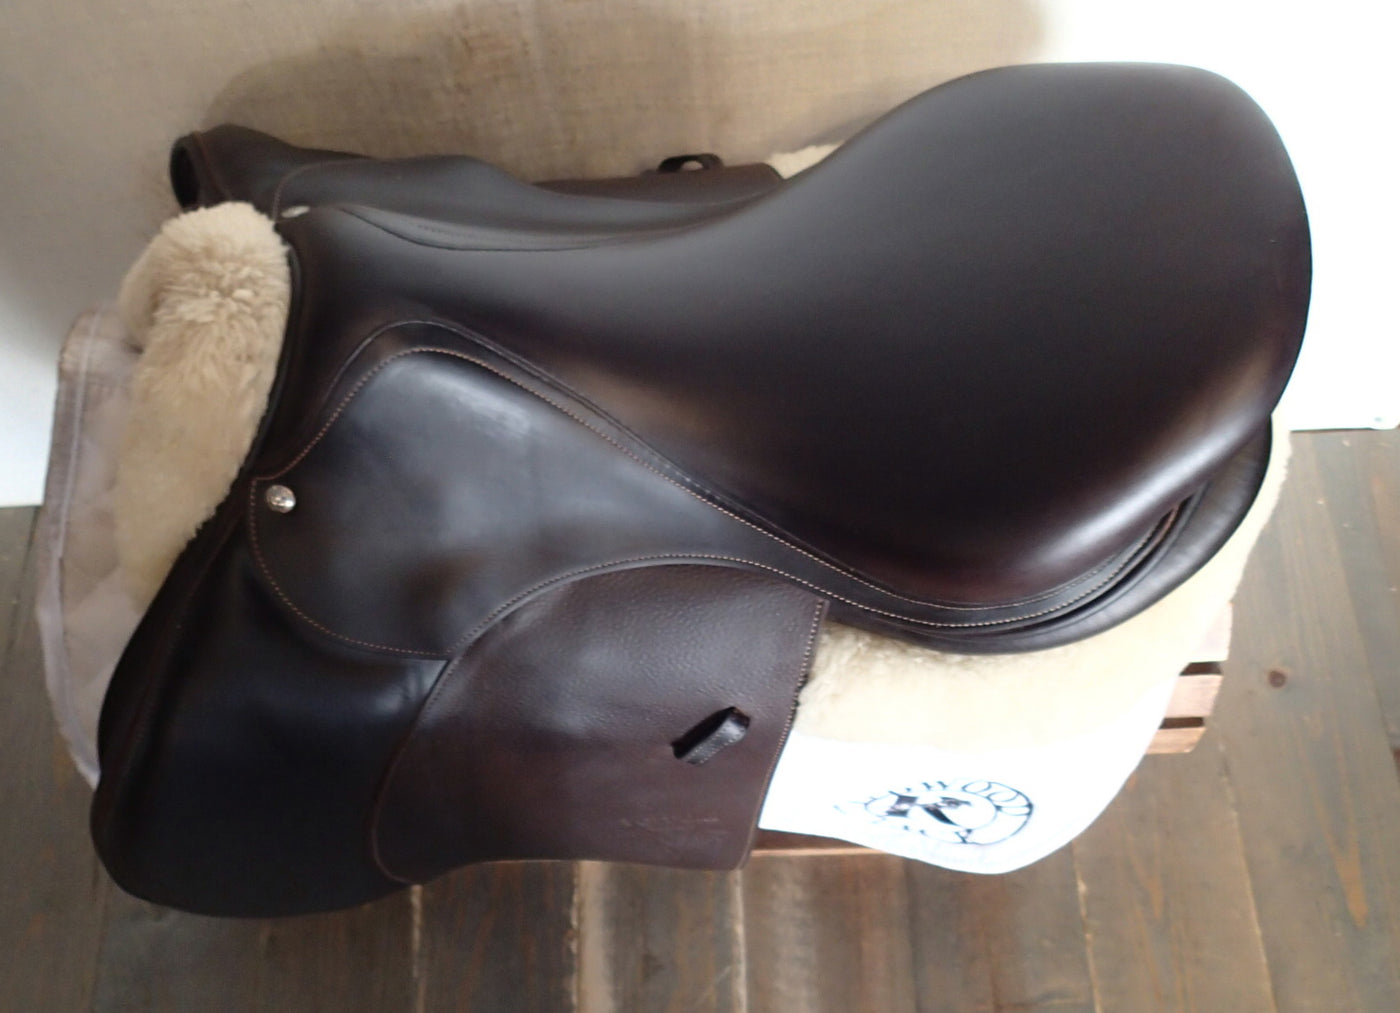 18" Voltaire Palm Beach Saddle - 2016 - 4AAR Flaps - 4.75" dot to dot - XFIN Panels